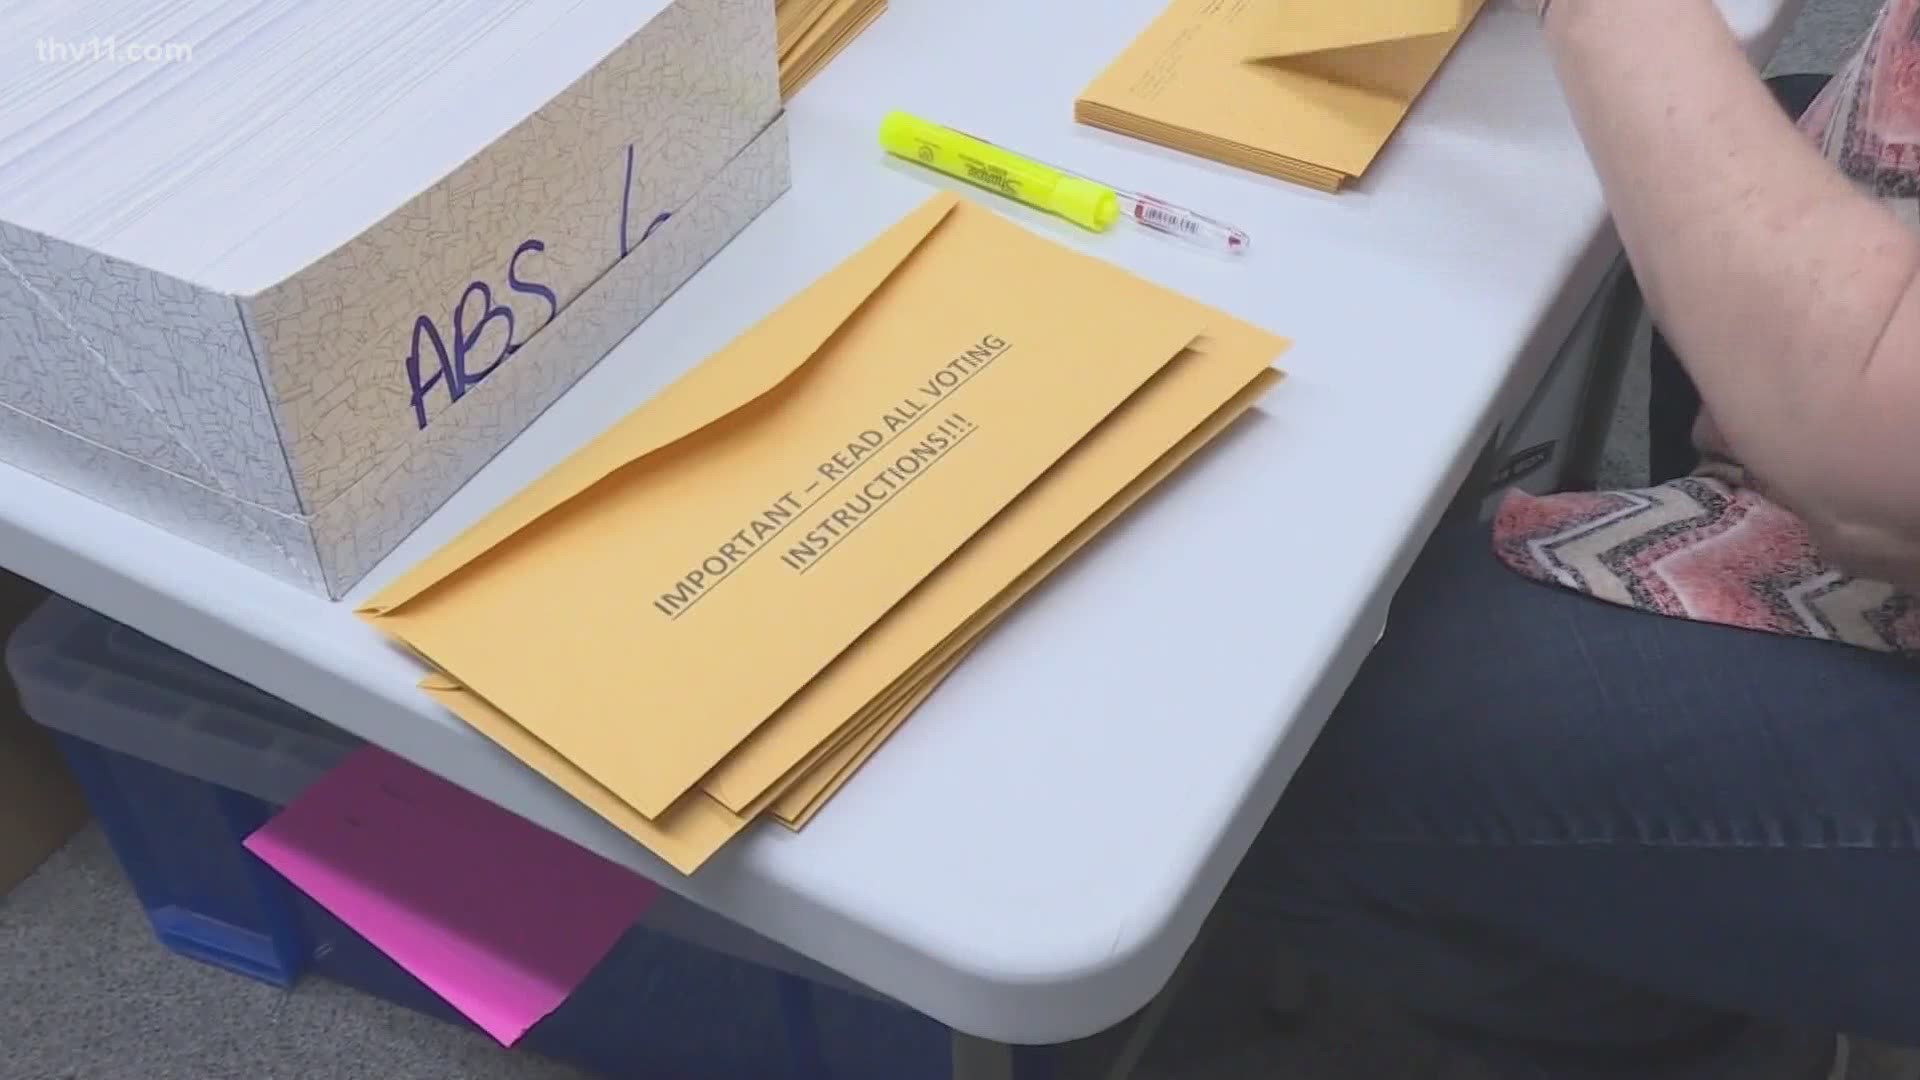 Arkansas voters have started getting their absentee ballots in the mail. But, we found out that some voters make costly mistakes when trying to get them in.